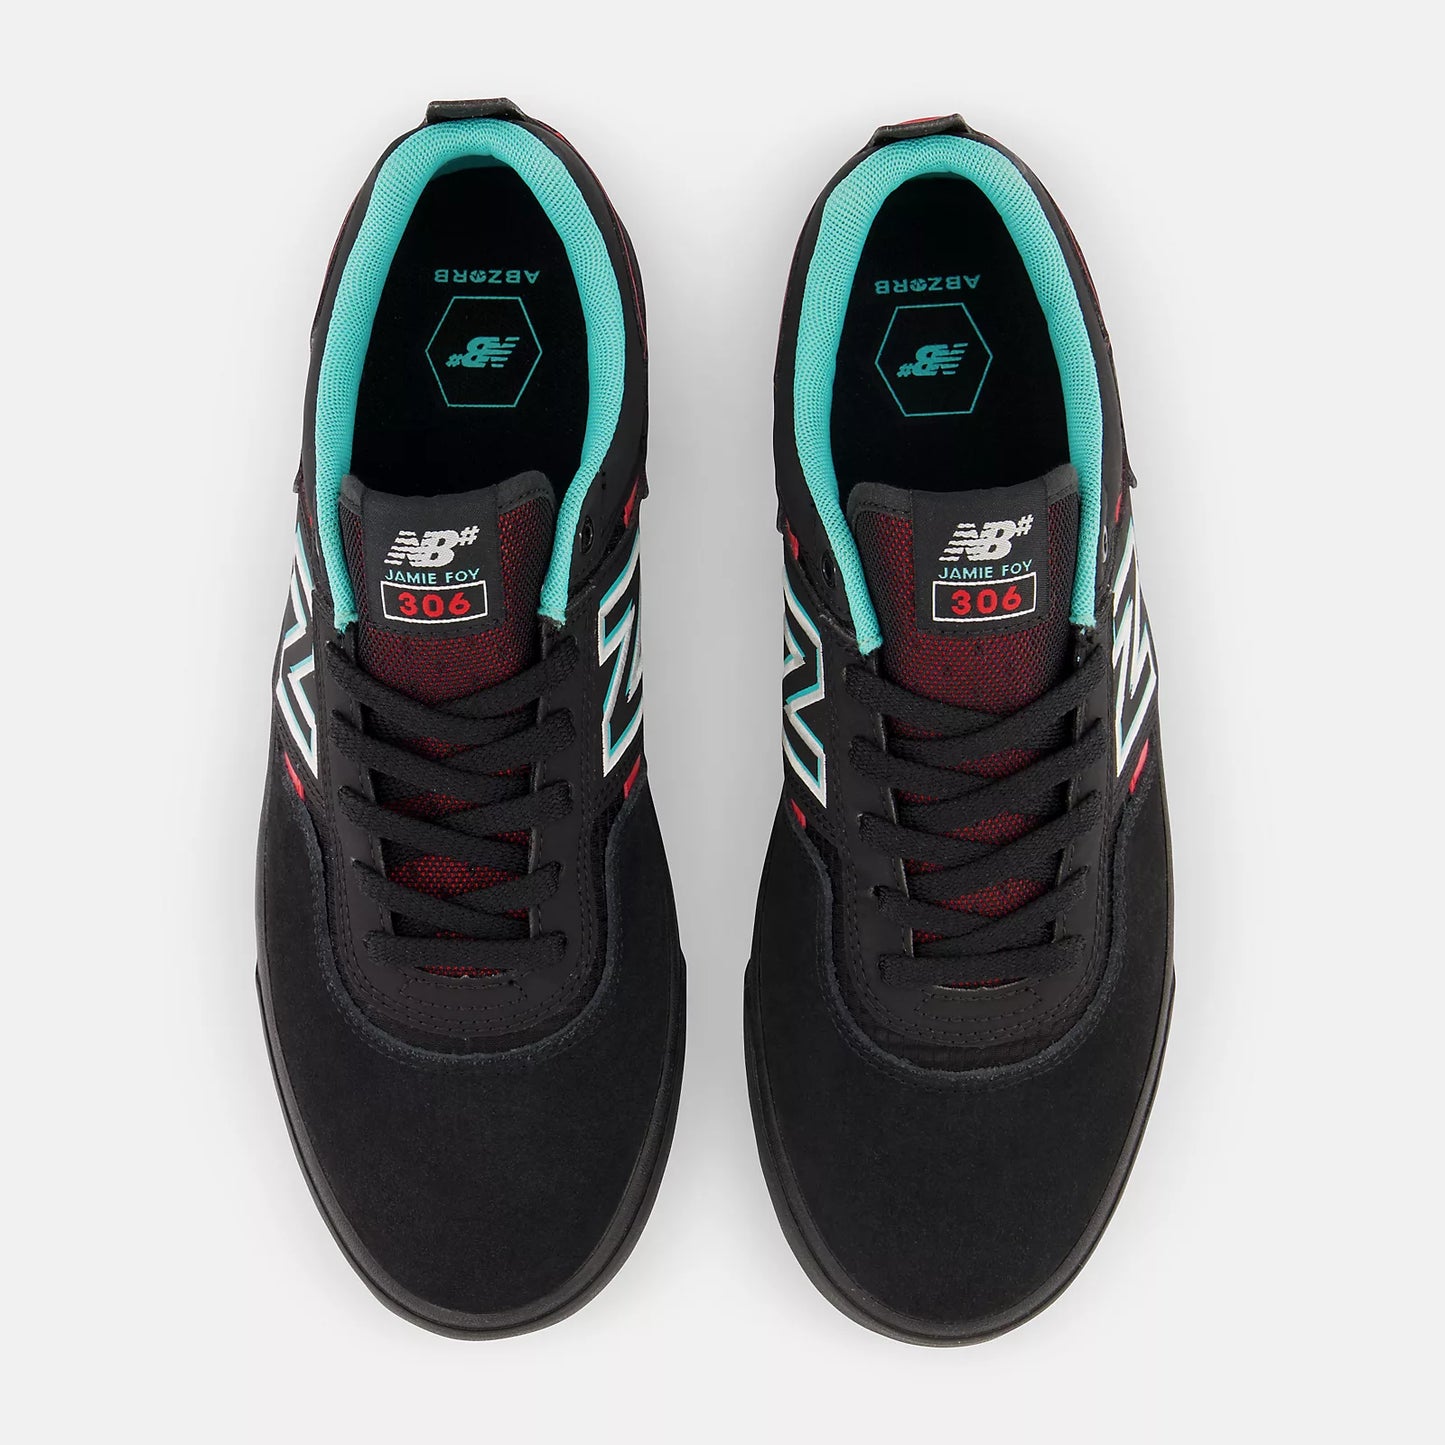 NB# 306 Foy - Black Electric Red